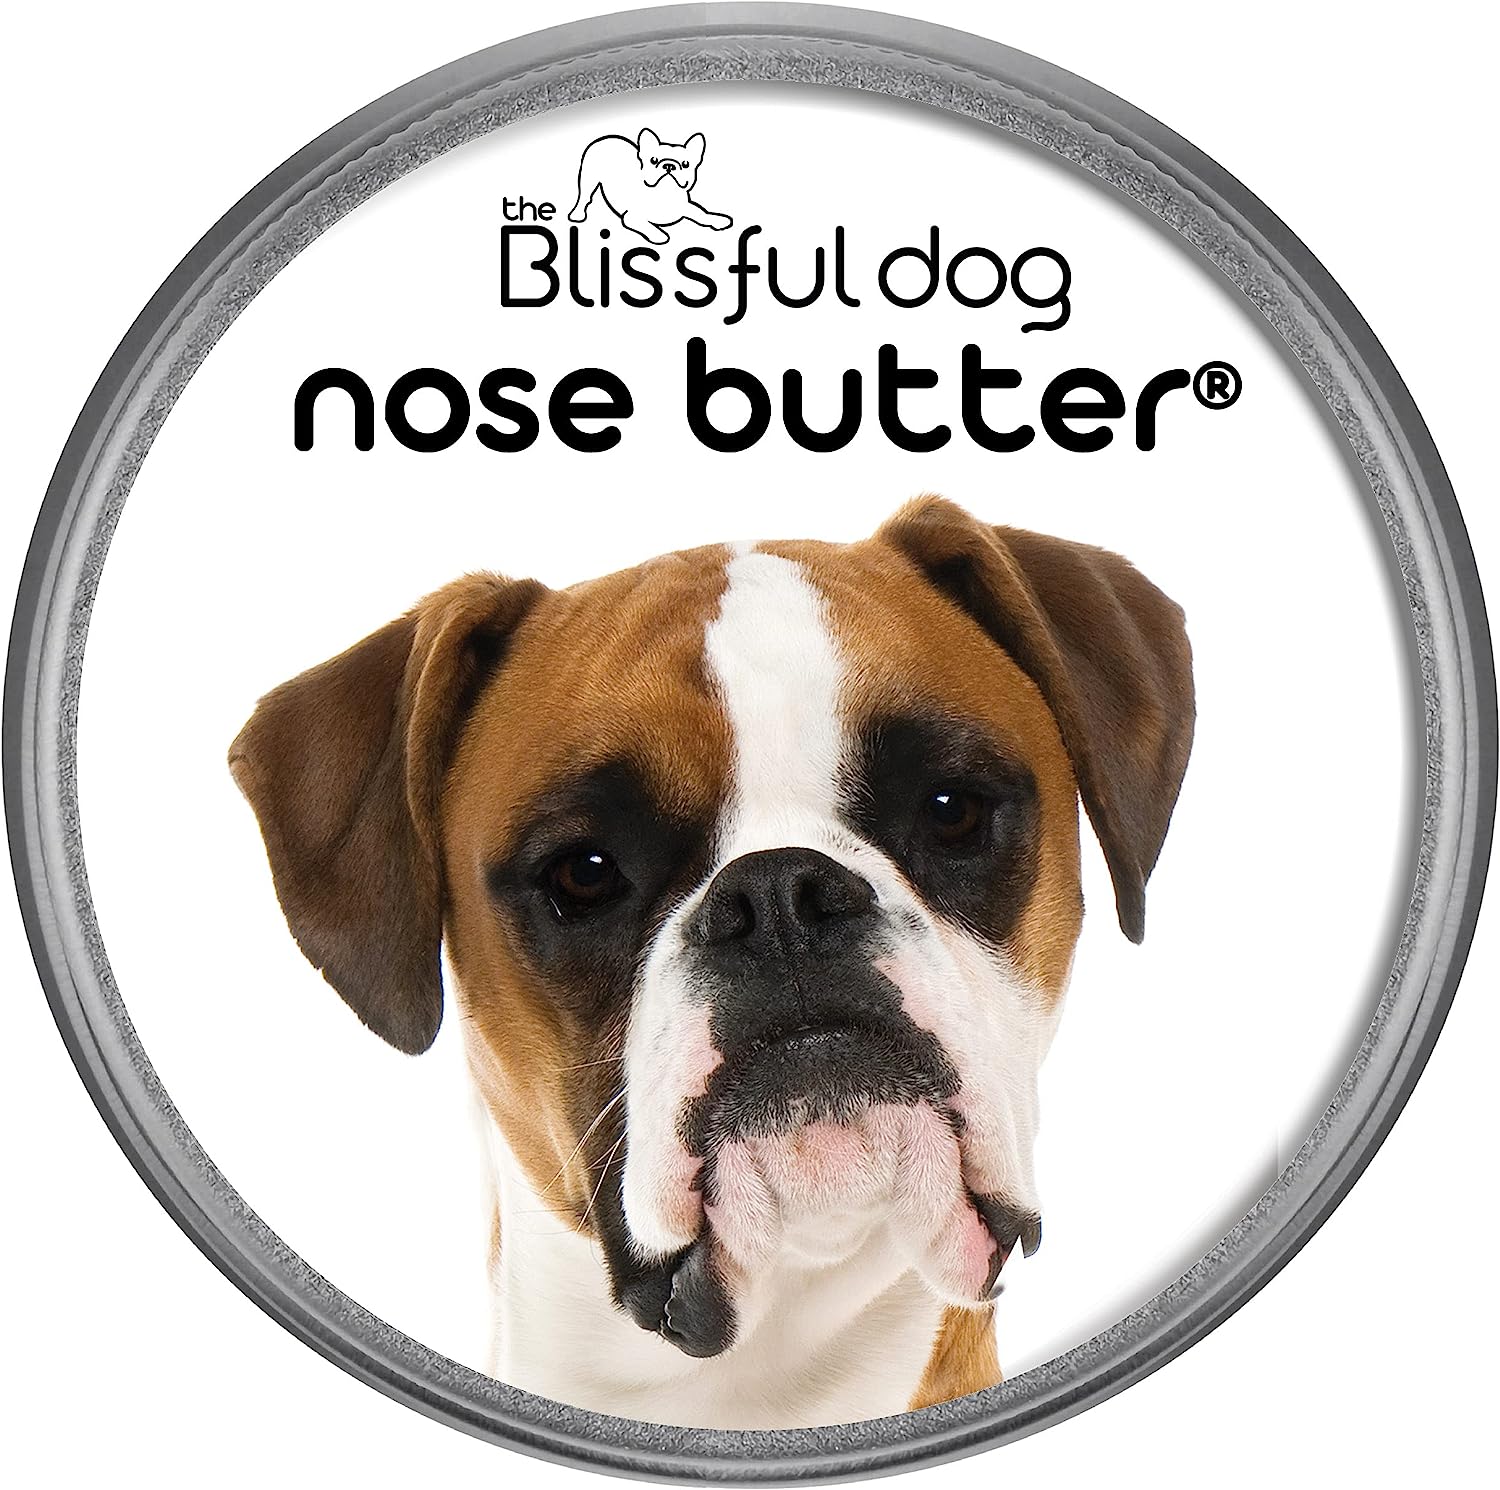 4. The Blissful Dog Nose Butter